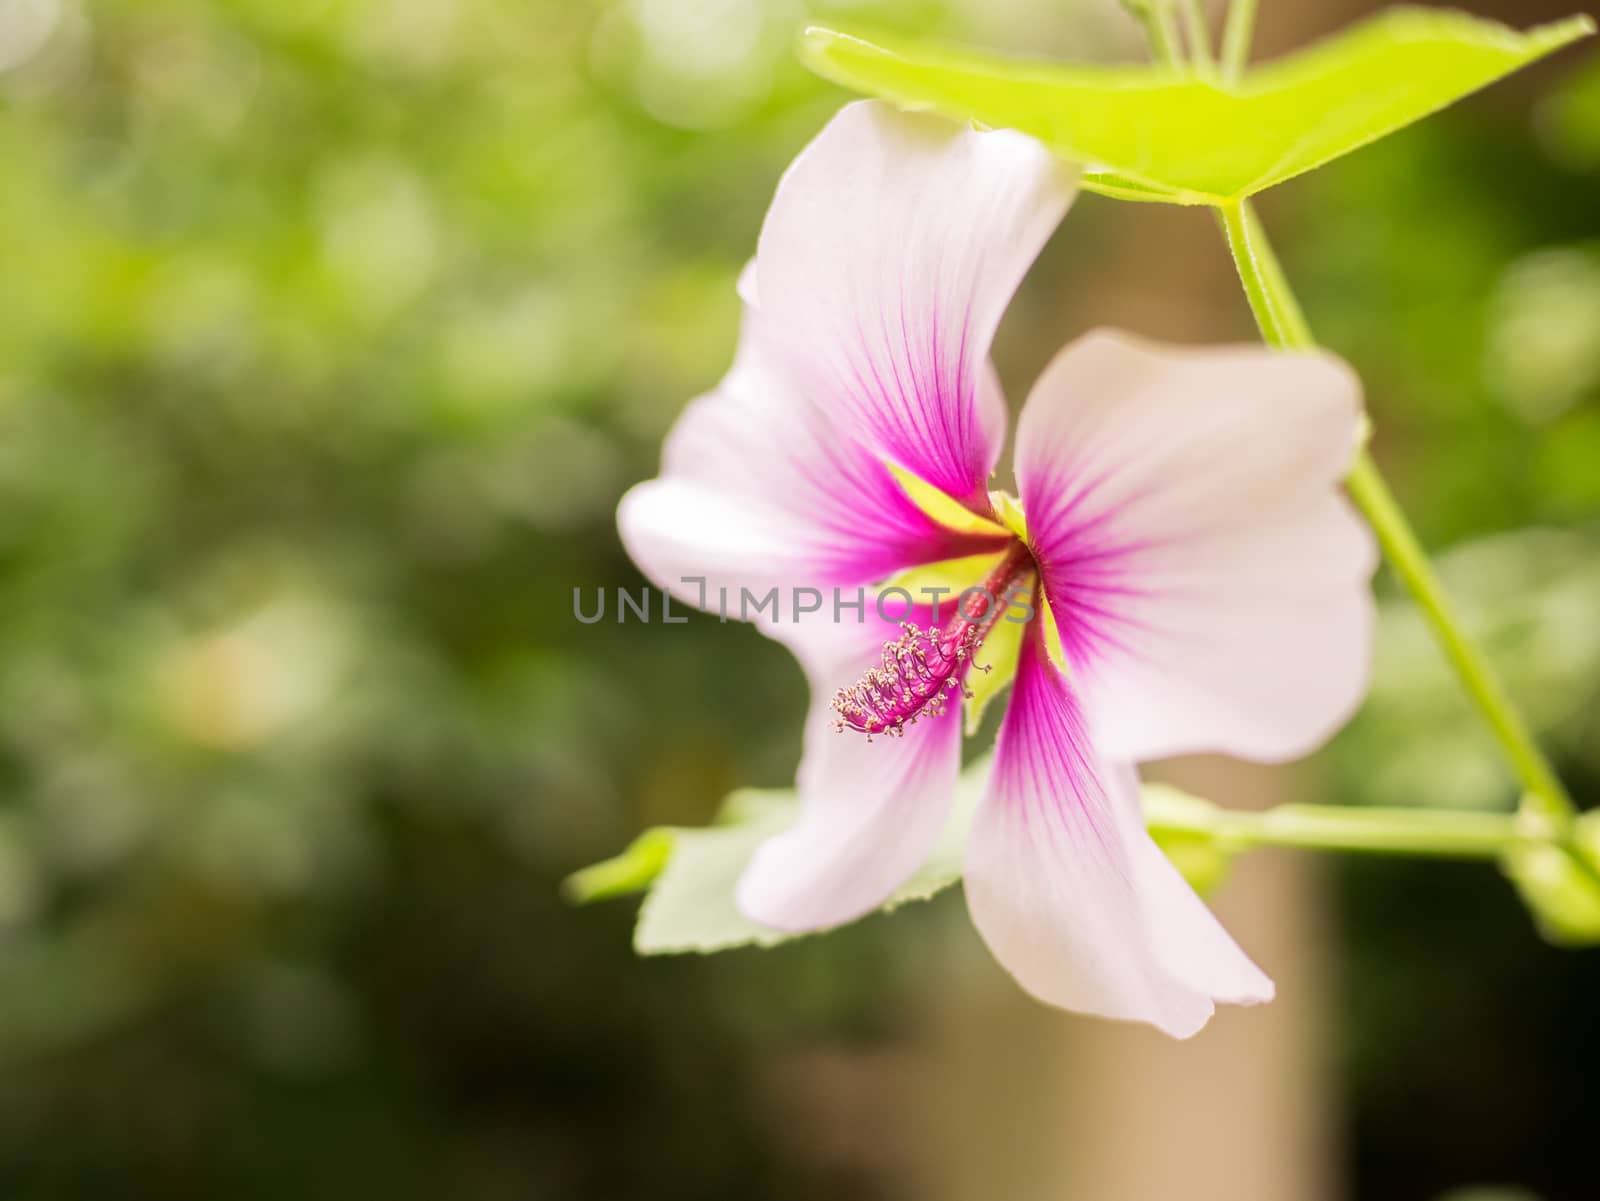 Stigma is beautifully in focus on the closeup soft focus shot of a white and pink flower